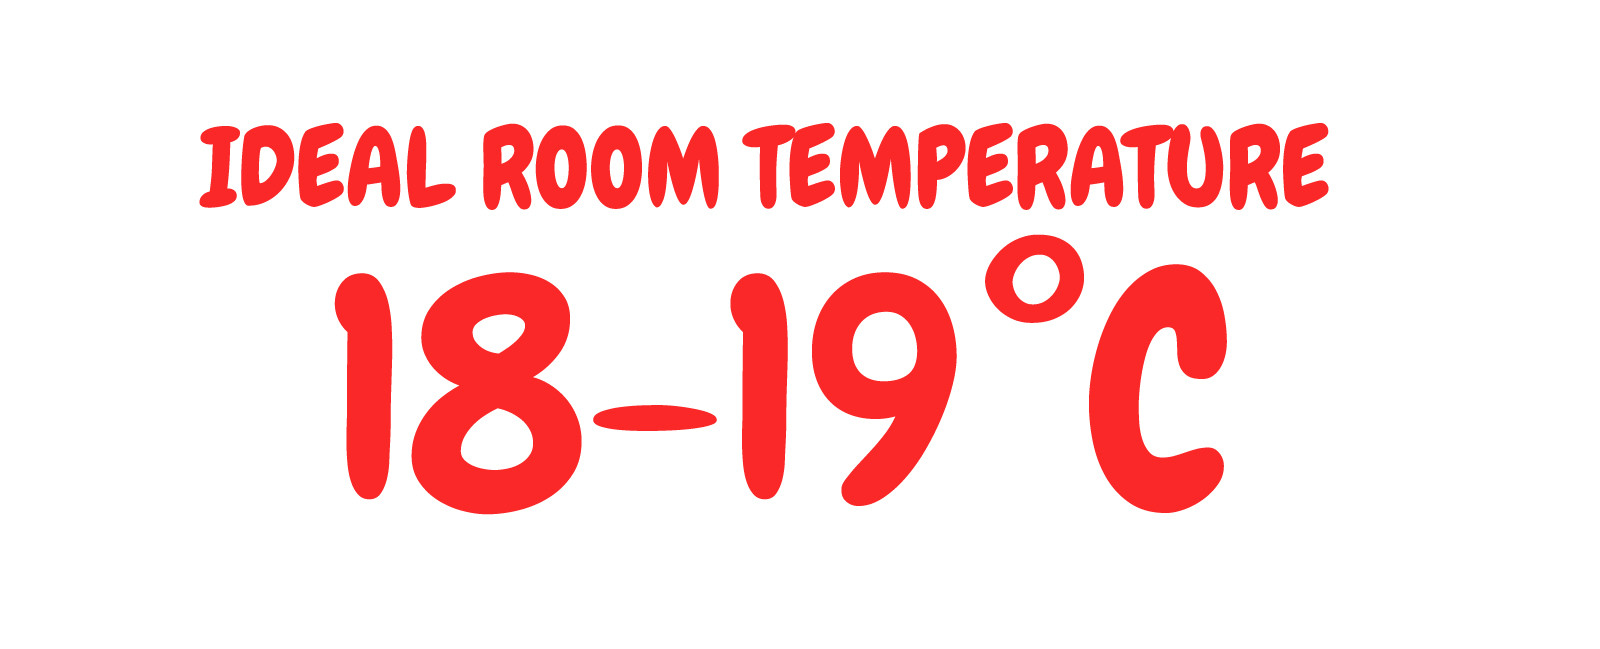 The Ideal Room Temperature for Every Situation